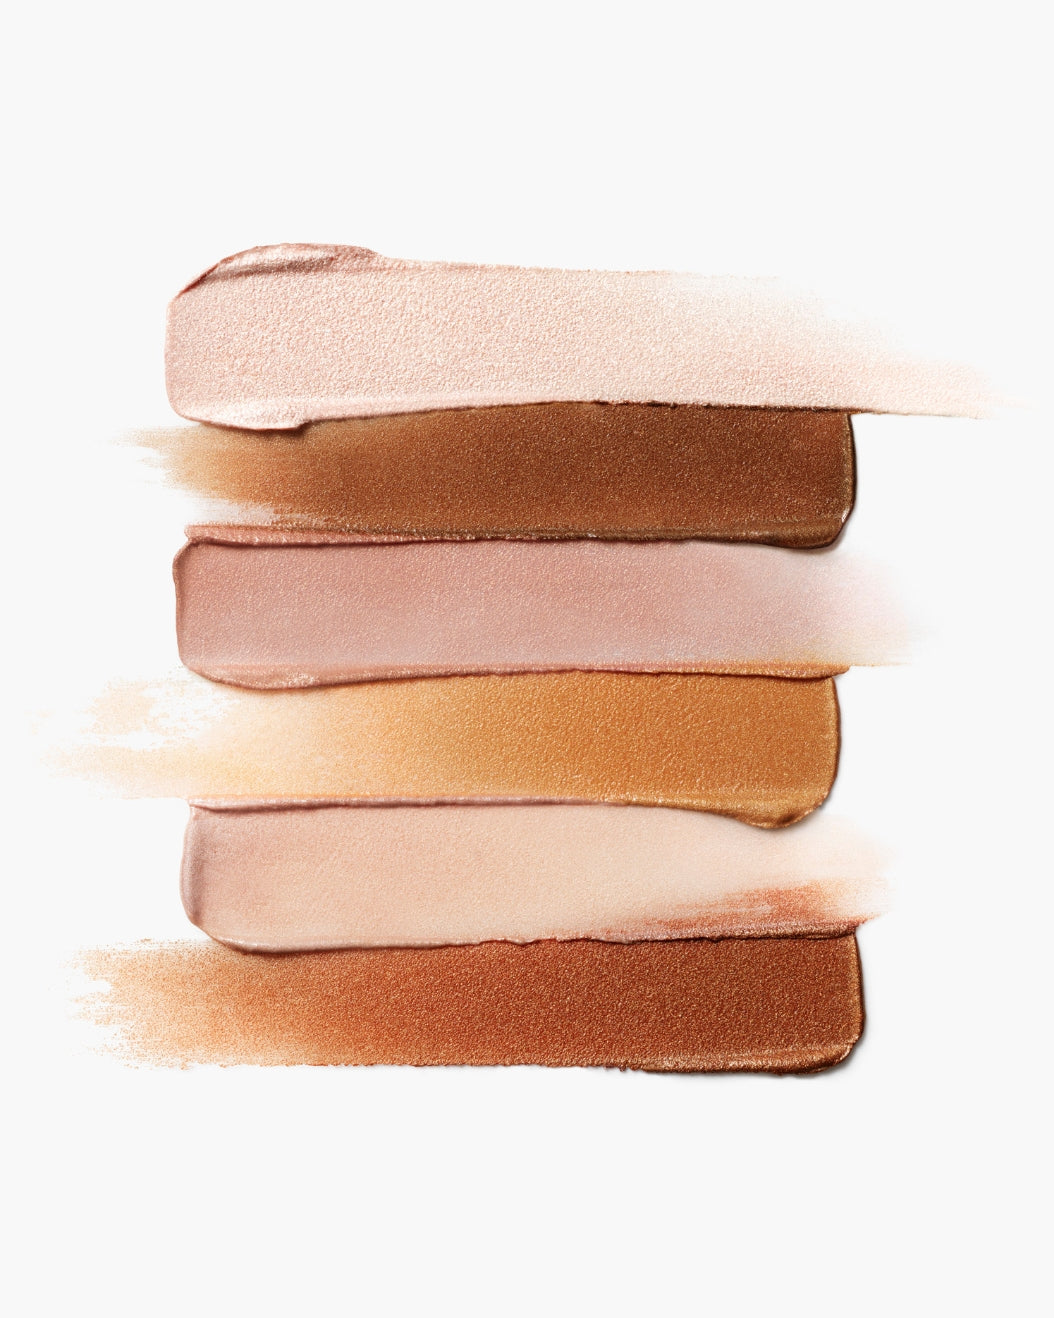 Swatches of the entire range of Milk Makeup Highlighter